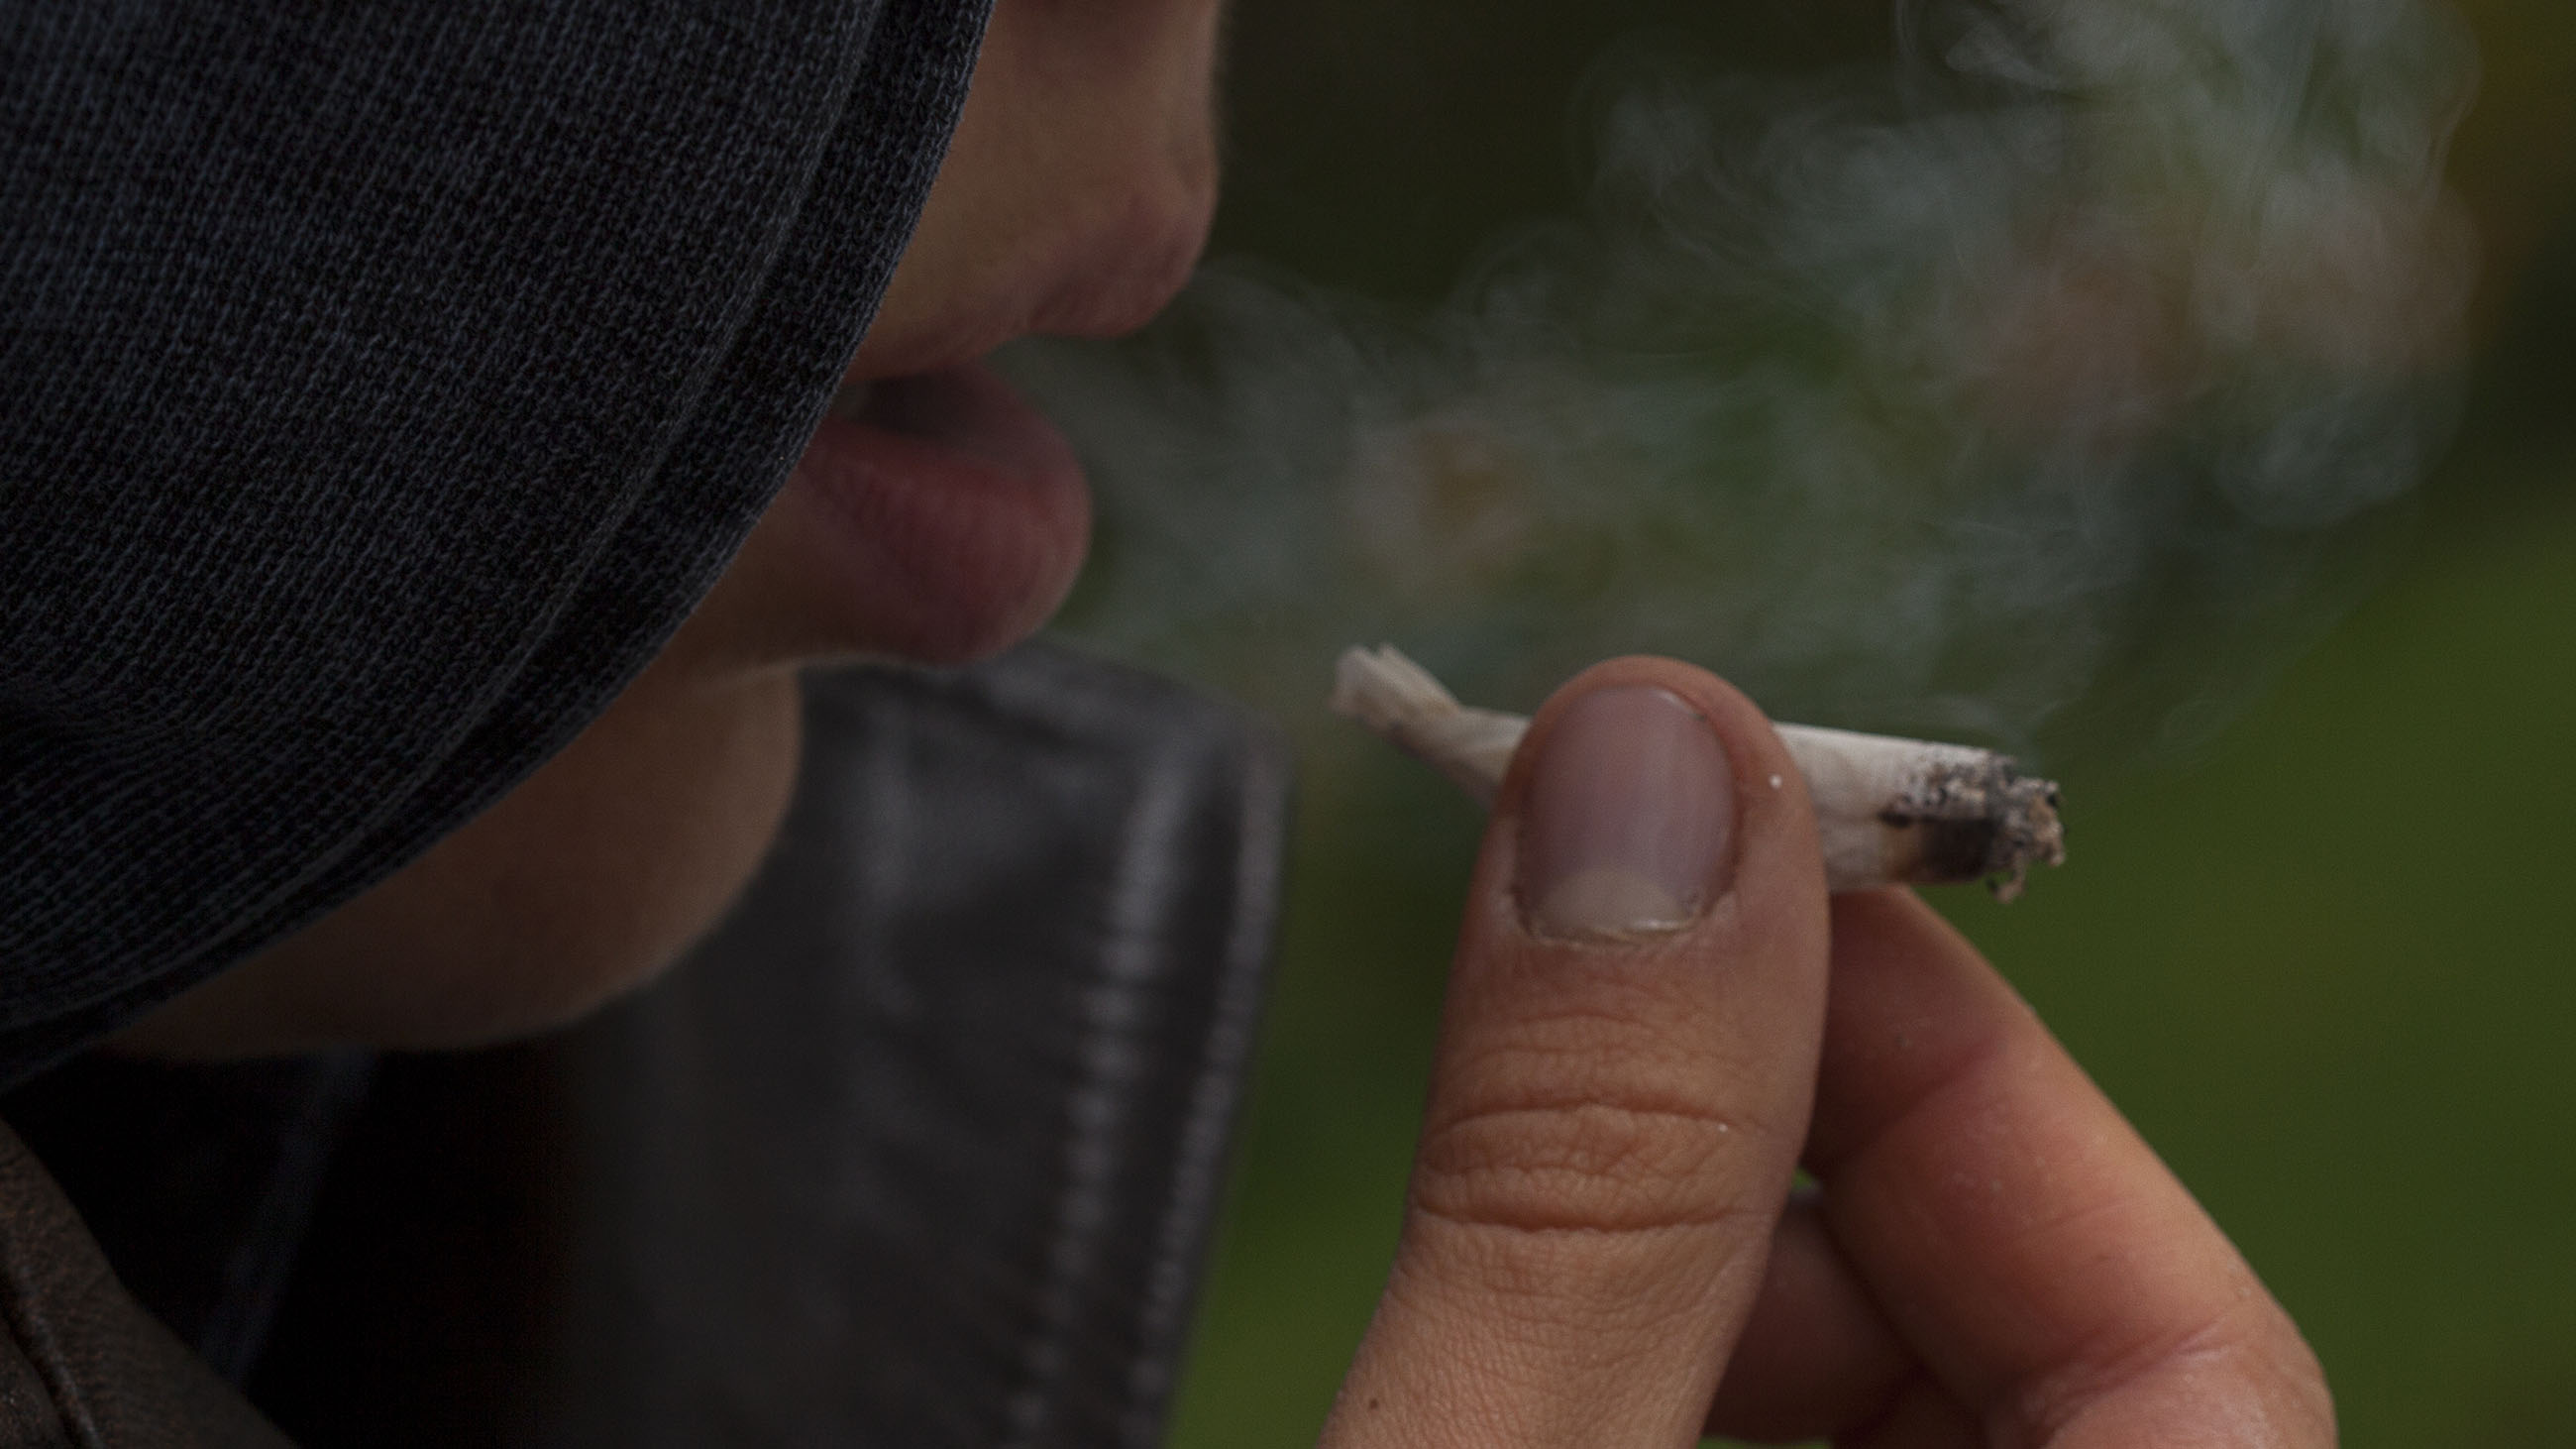 Public health advocates have worried that the emergence of legalized marijuana in many states would lead to increased use by teens. That doesn't seem to be the case.